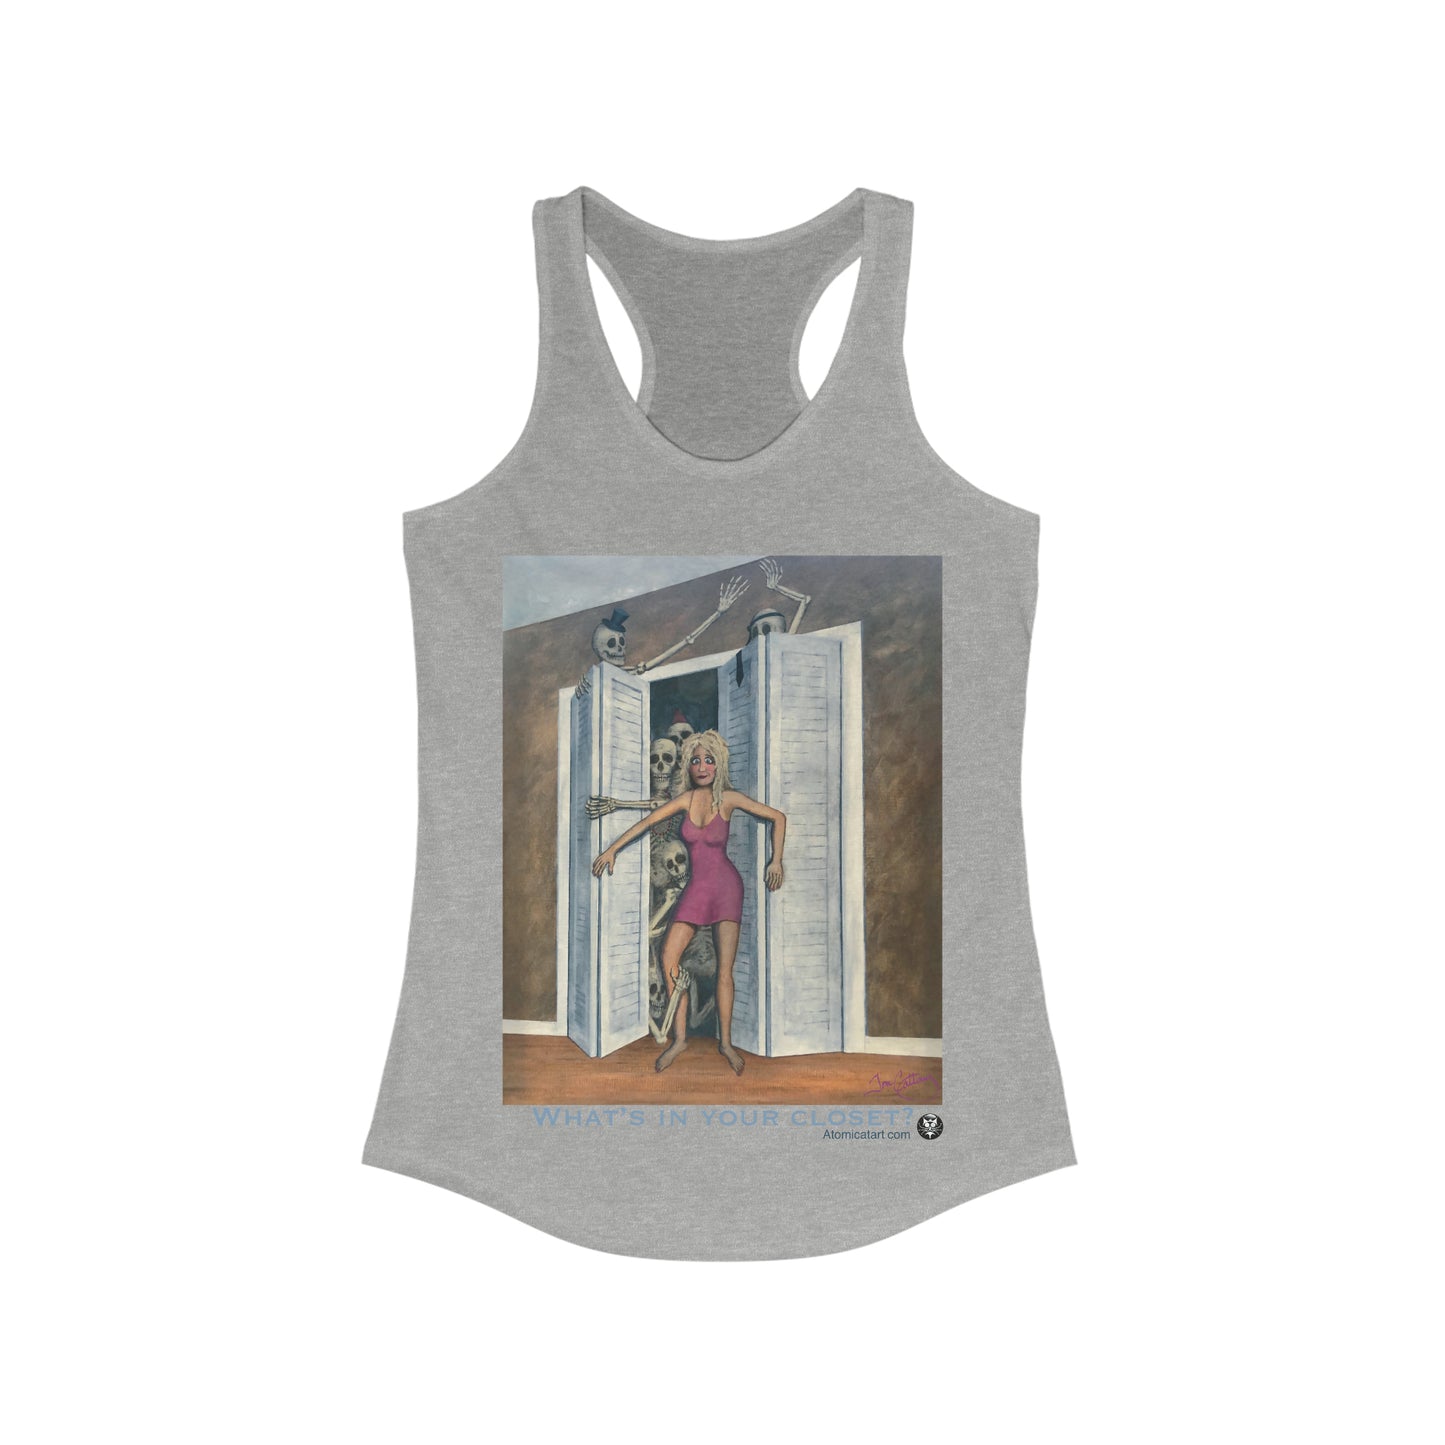 What's in your closet? - Women's Tank